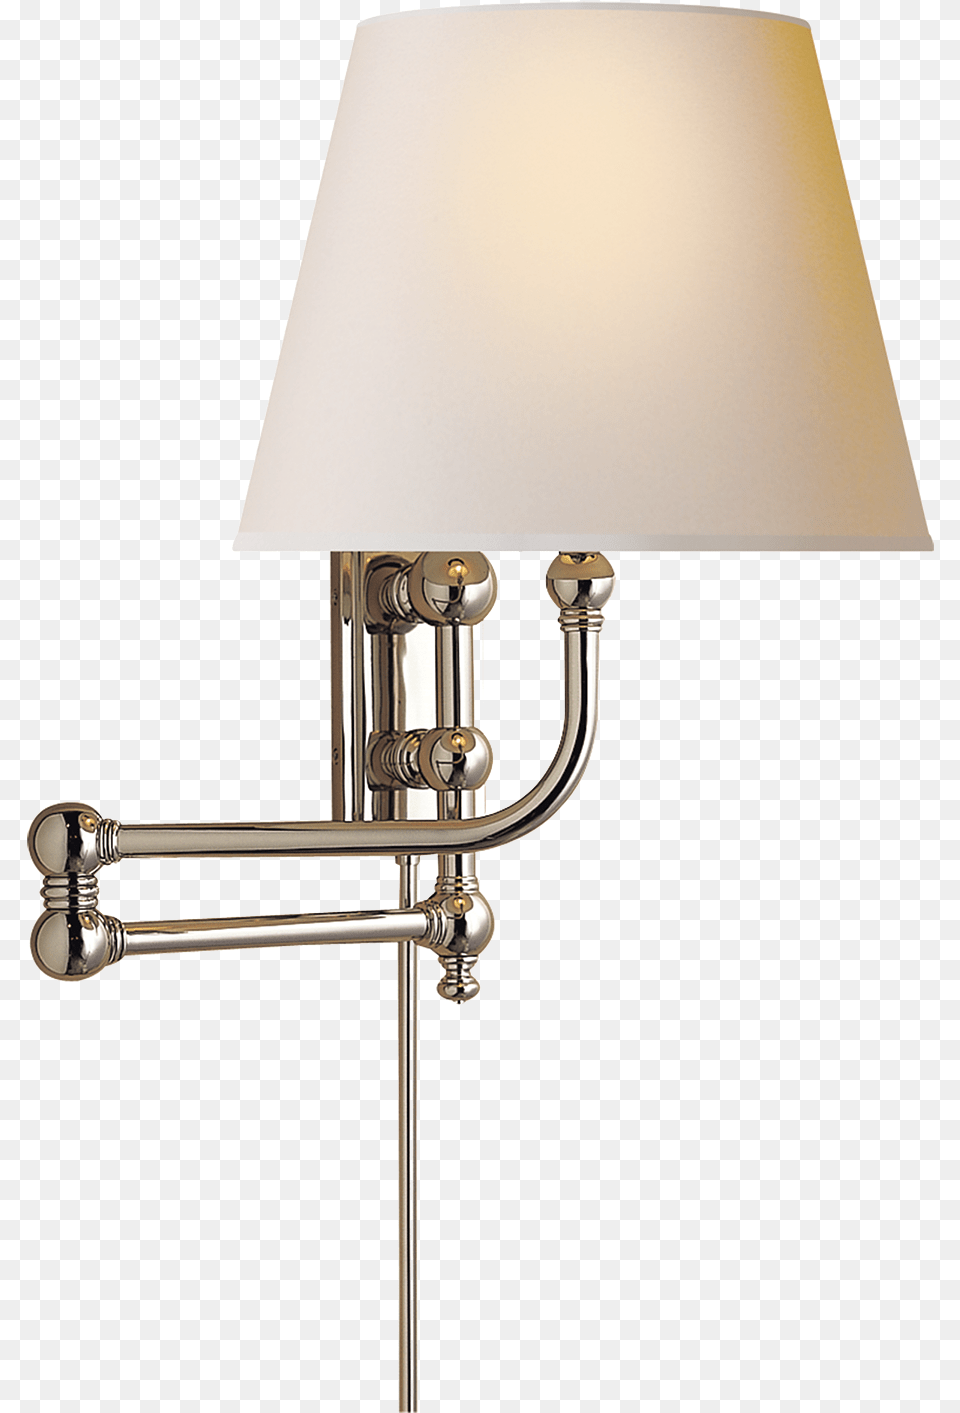 Pimlico Swing Arm Desk Lamp, Lampshade, Table Lamp Free Transparent Png